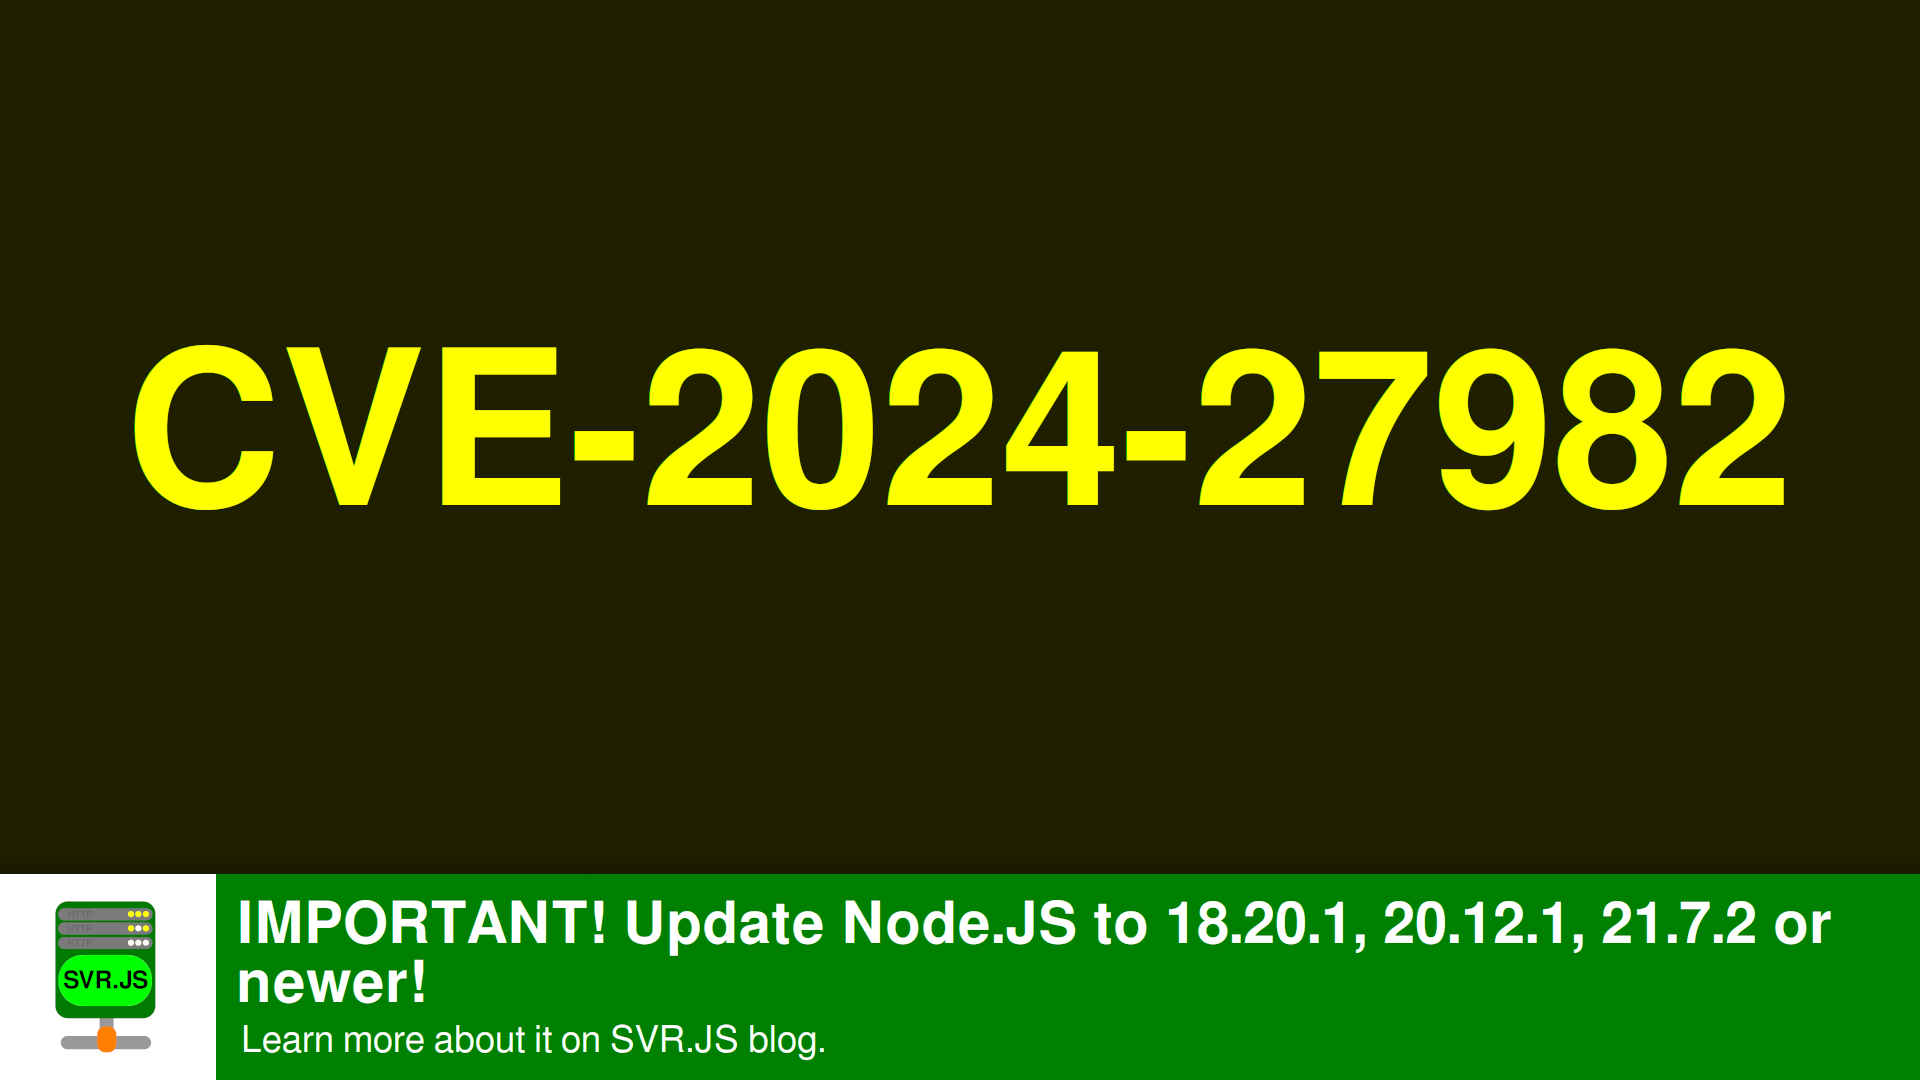 Older versions of Node.JS had a CVE-2024-27982 vulnerability, which involves placing a space before Content-Length header, enabling attackers to smugg